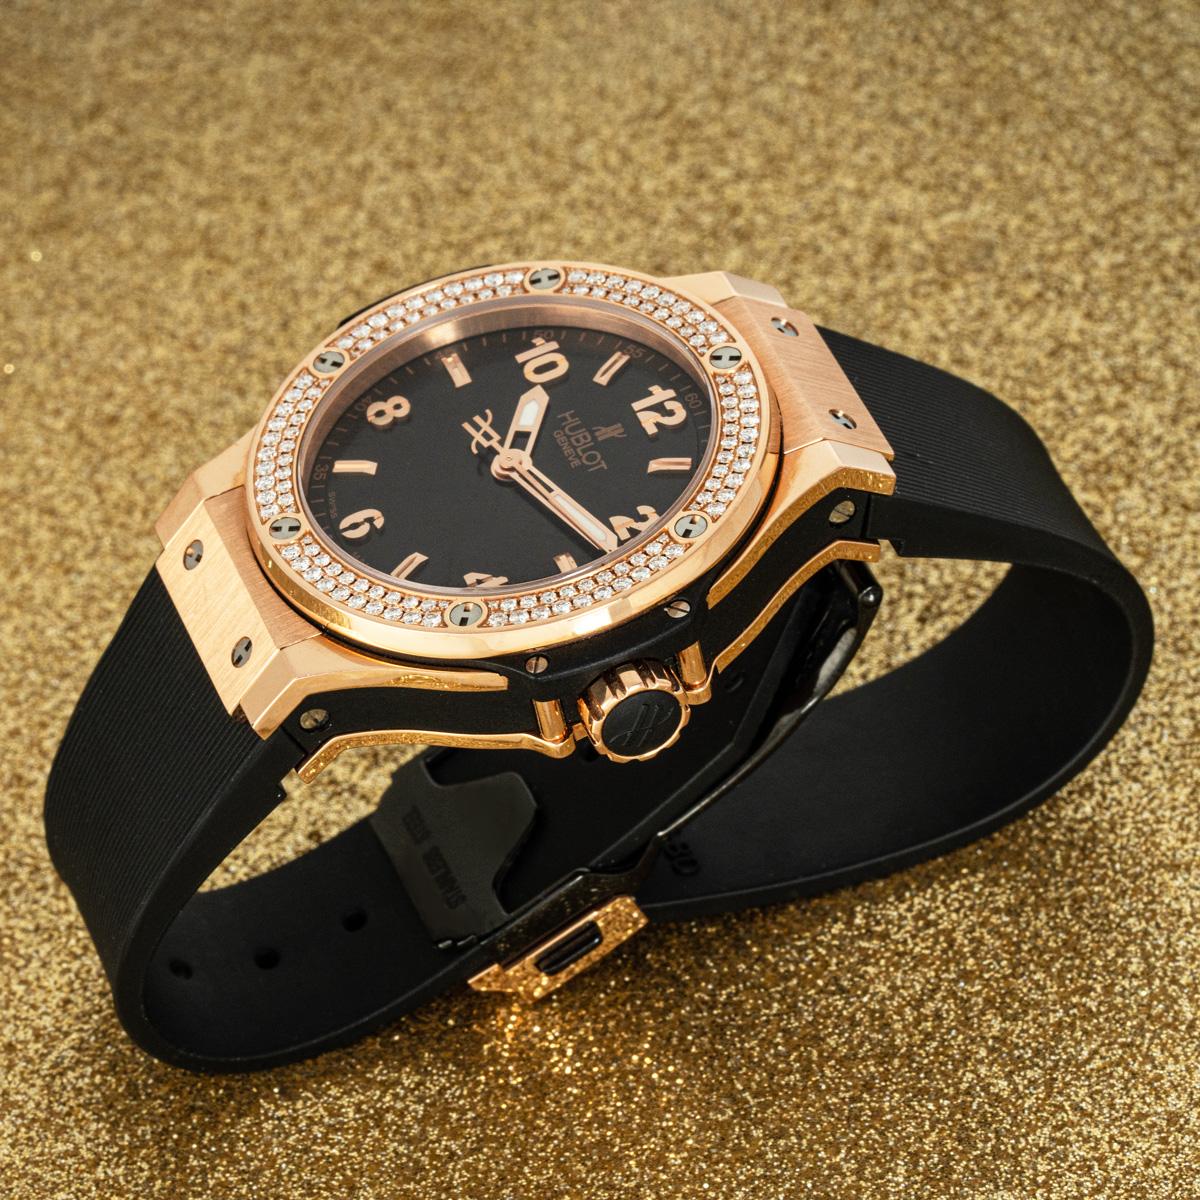 A ladies 38mm Big Bang in rose gold from Hublot. Features a black dial and a rose gold bezel, set with approximately 126 round brilliant cut diamonds.

Fitted with sapphire crystal and a quartz movement. The watch is equipped with an original black